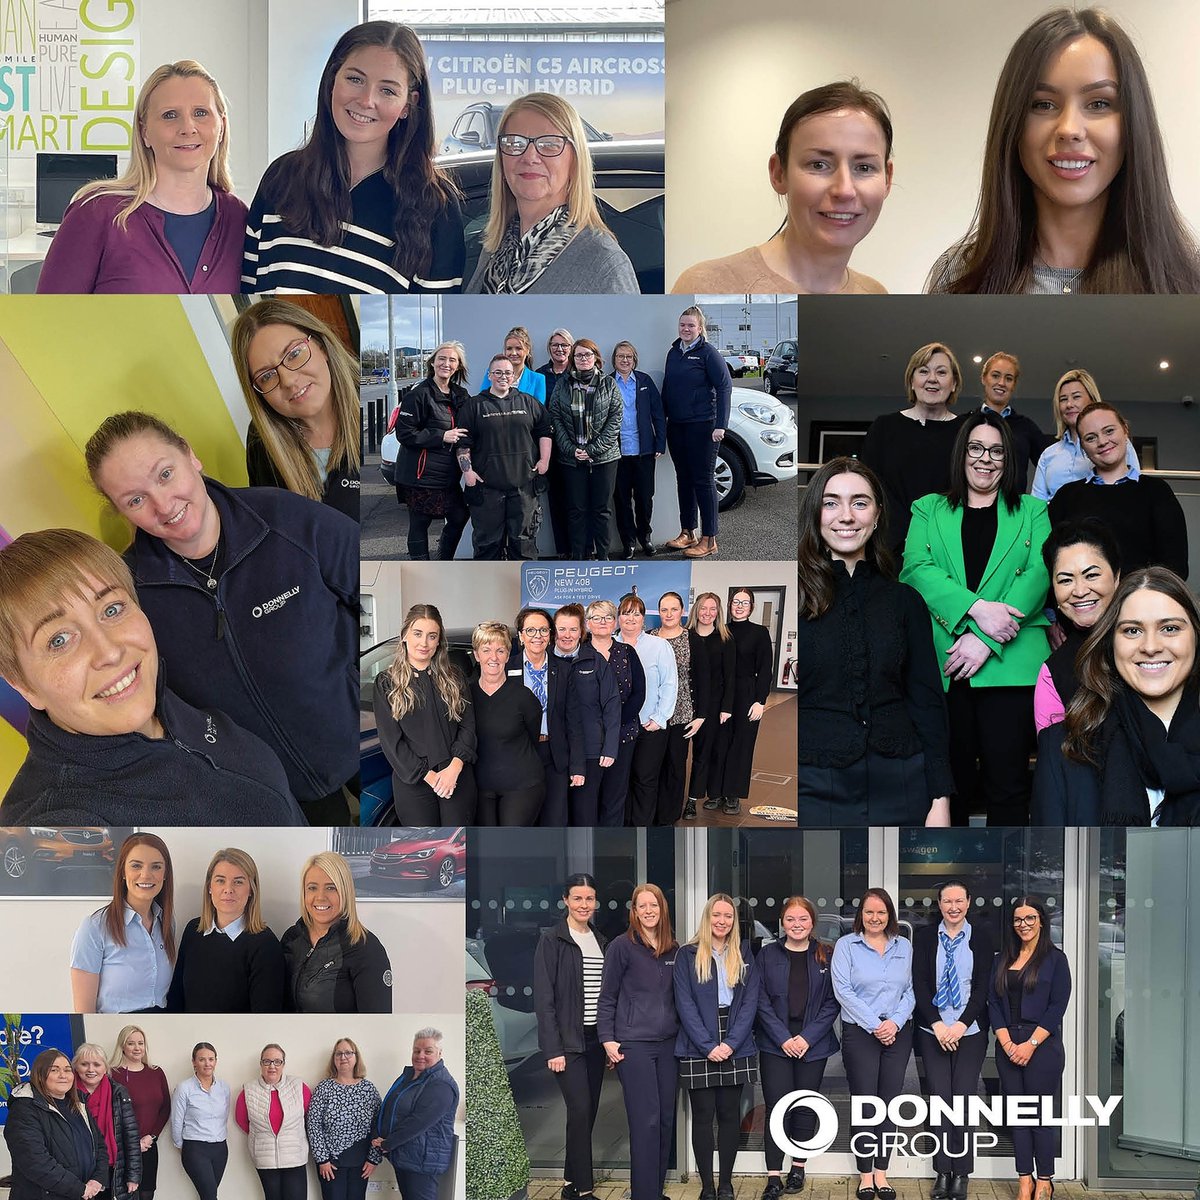 Happy International Women's Day 2023 from Donnelly Group! We are celebrating all the women that help keep the wheels of Donnelly Group moving, not just today but every day! #IWD23